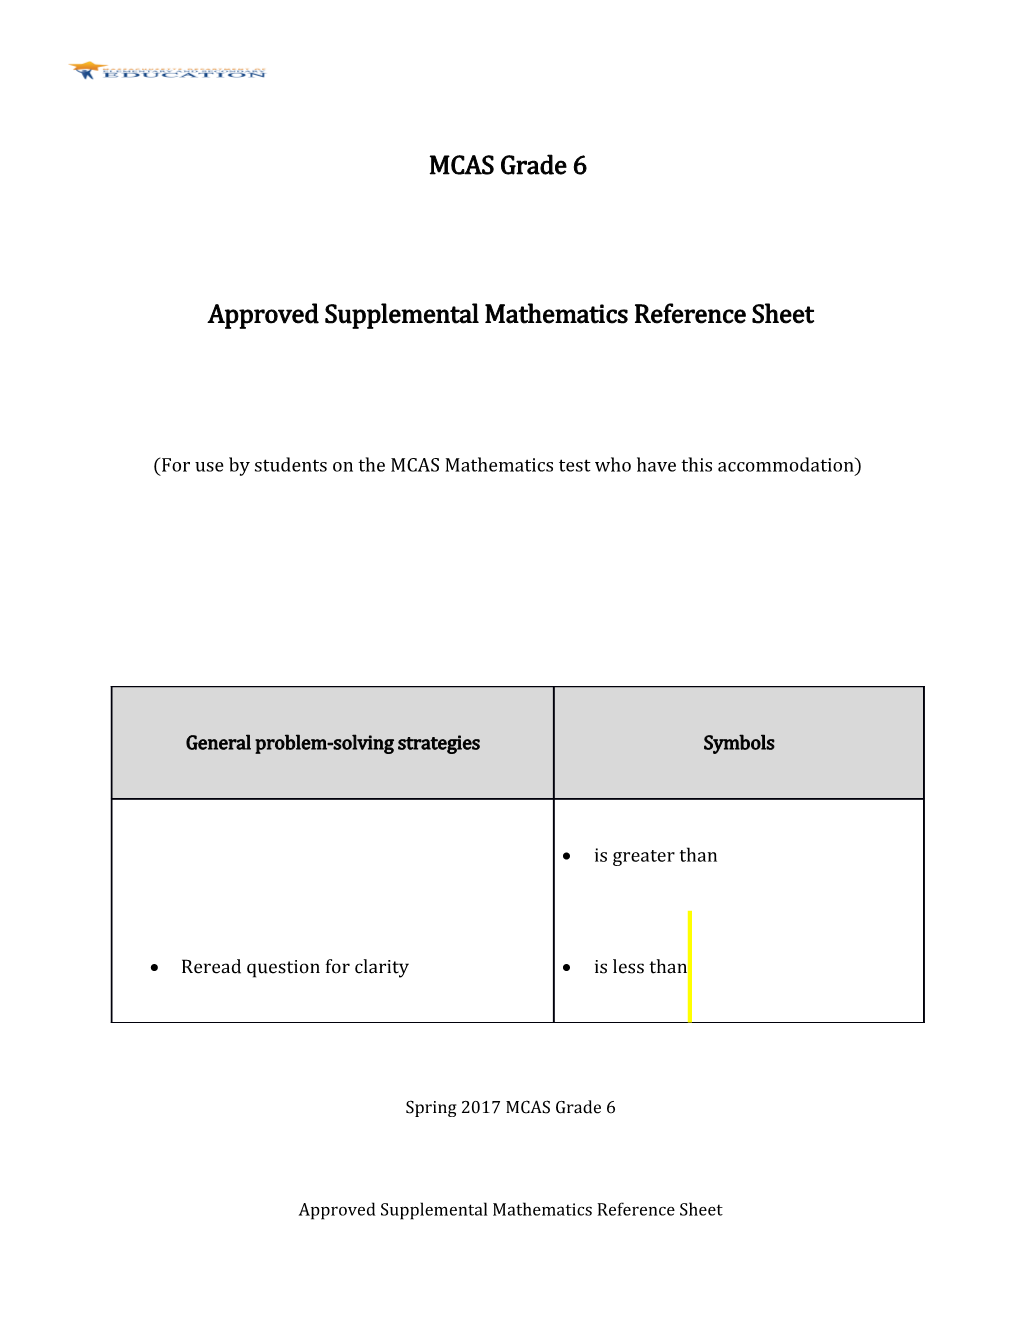 MCAS Grade 6 Approved Supplemental Math Reference Sheet 2016-2017